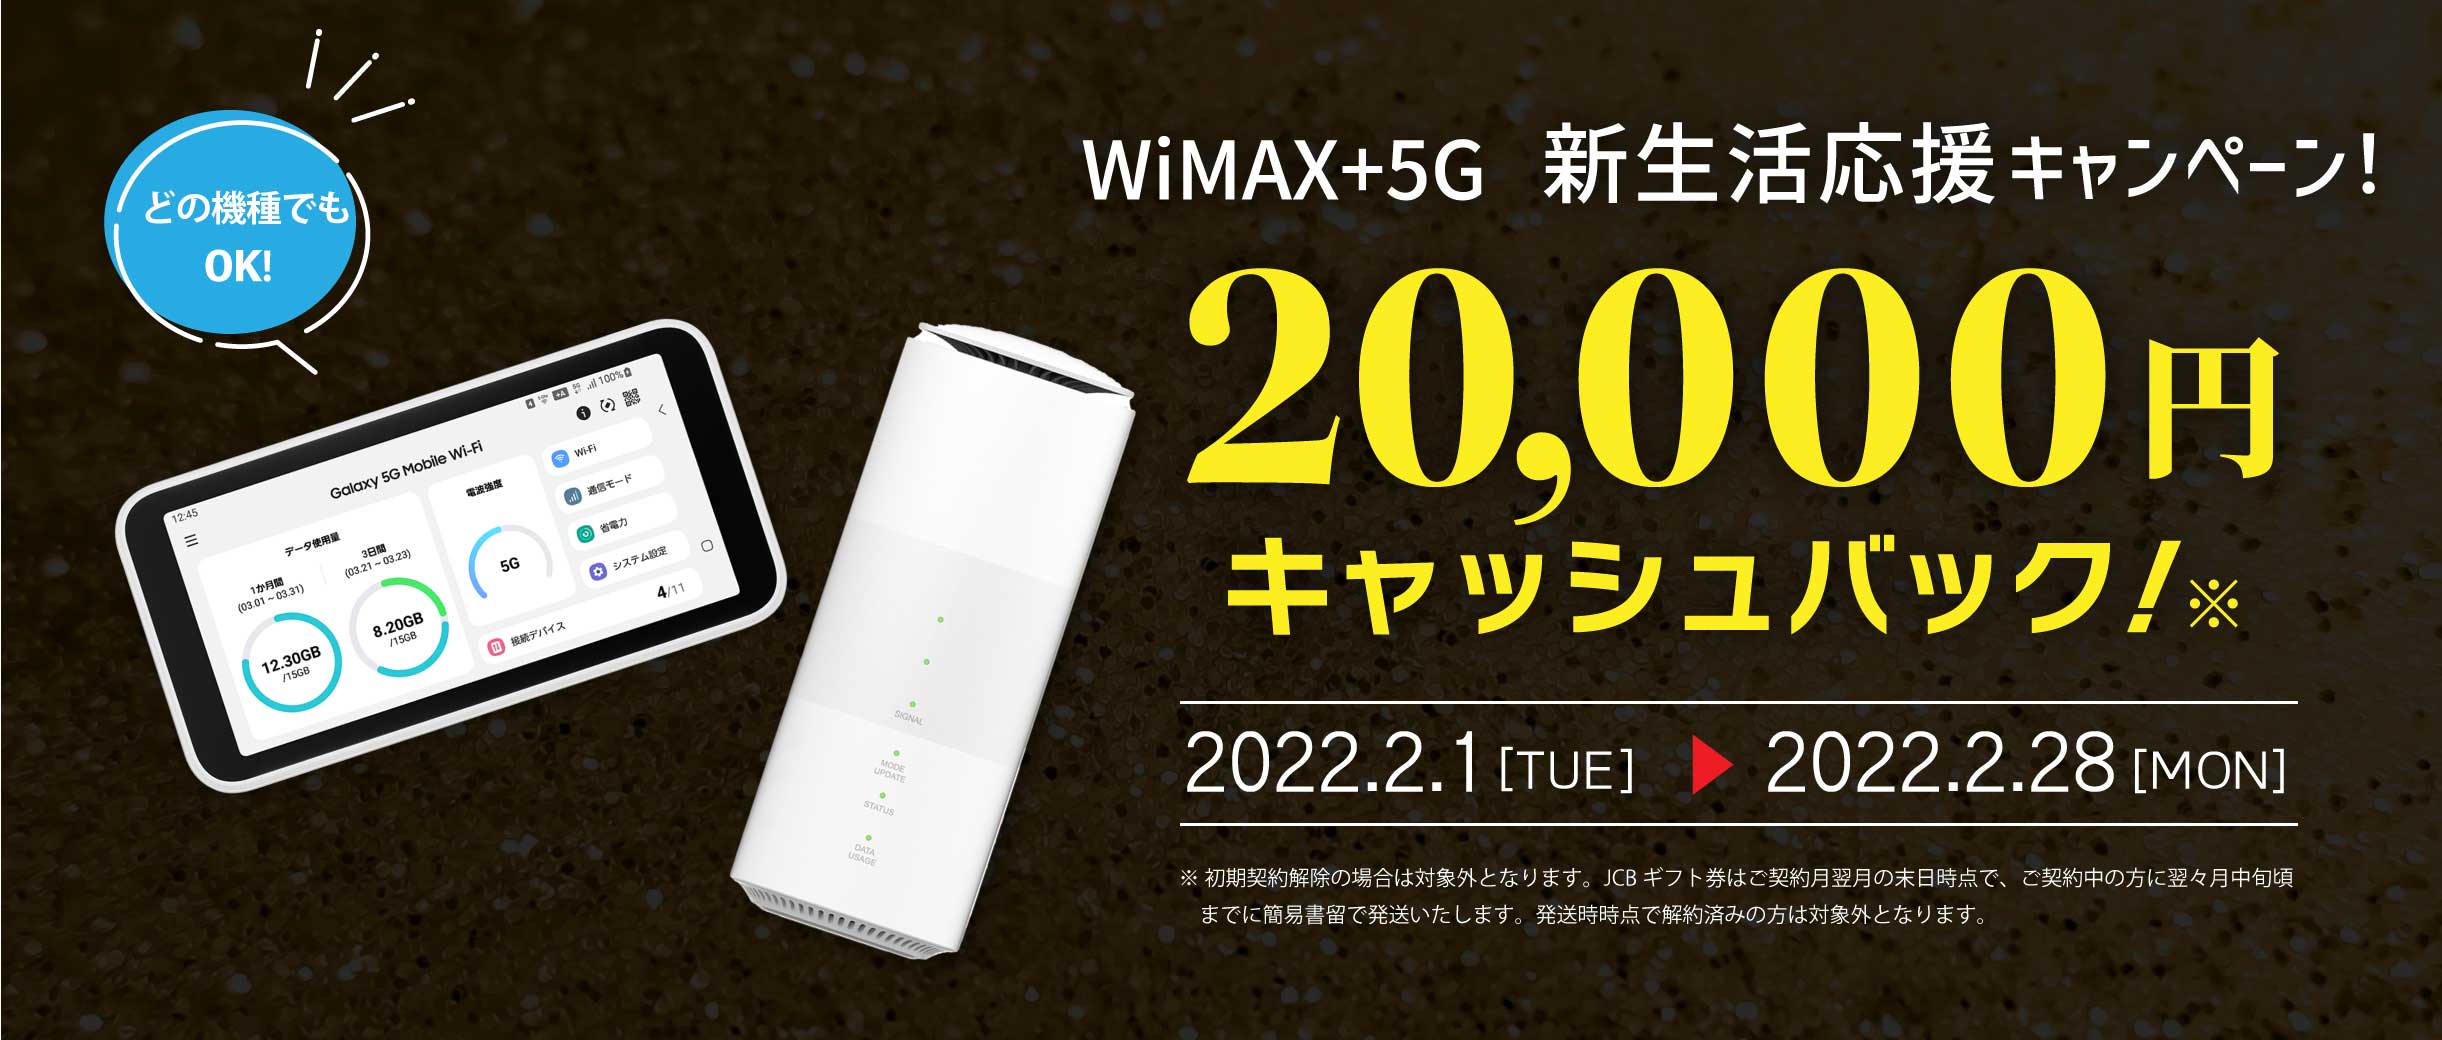 wimax キャッシュバック